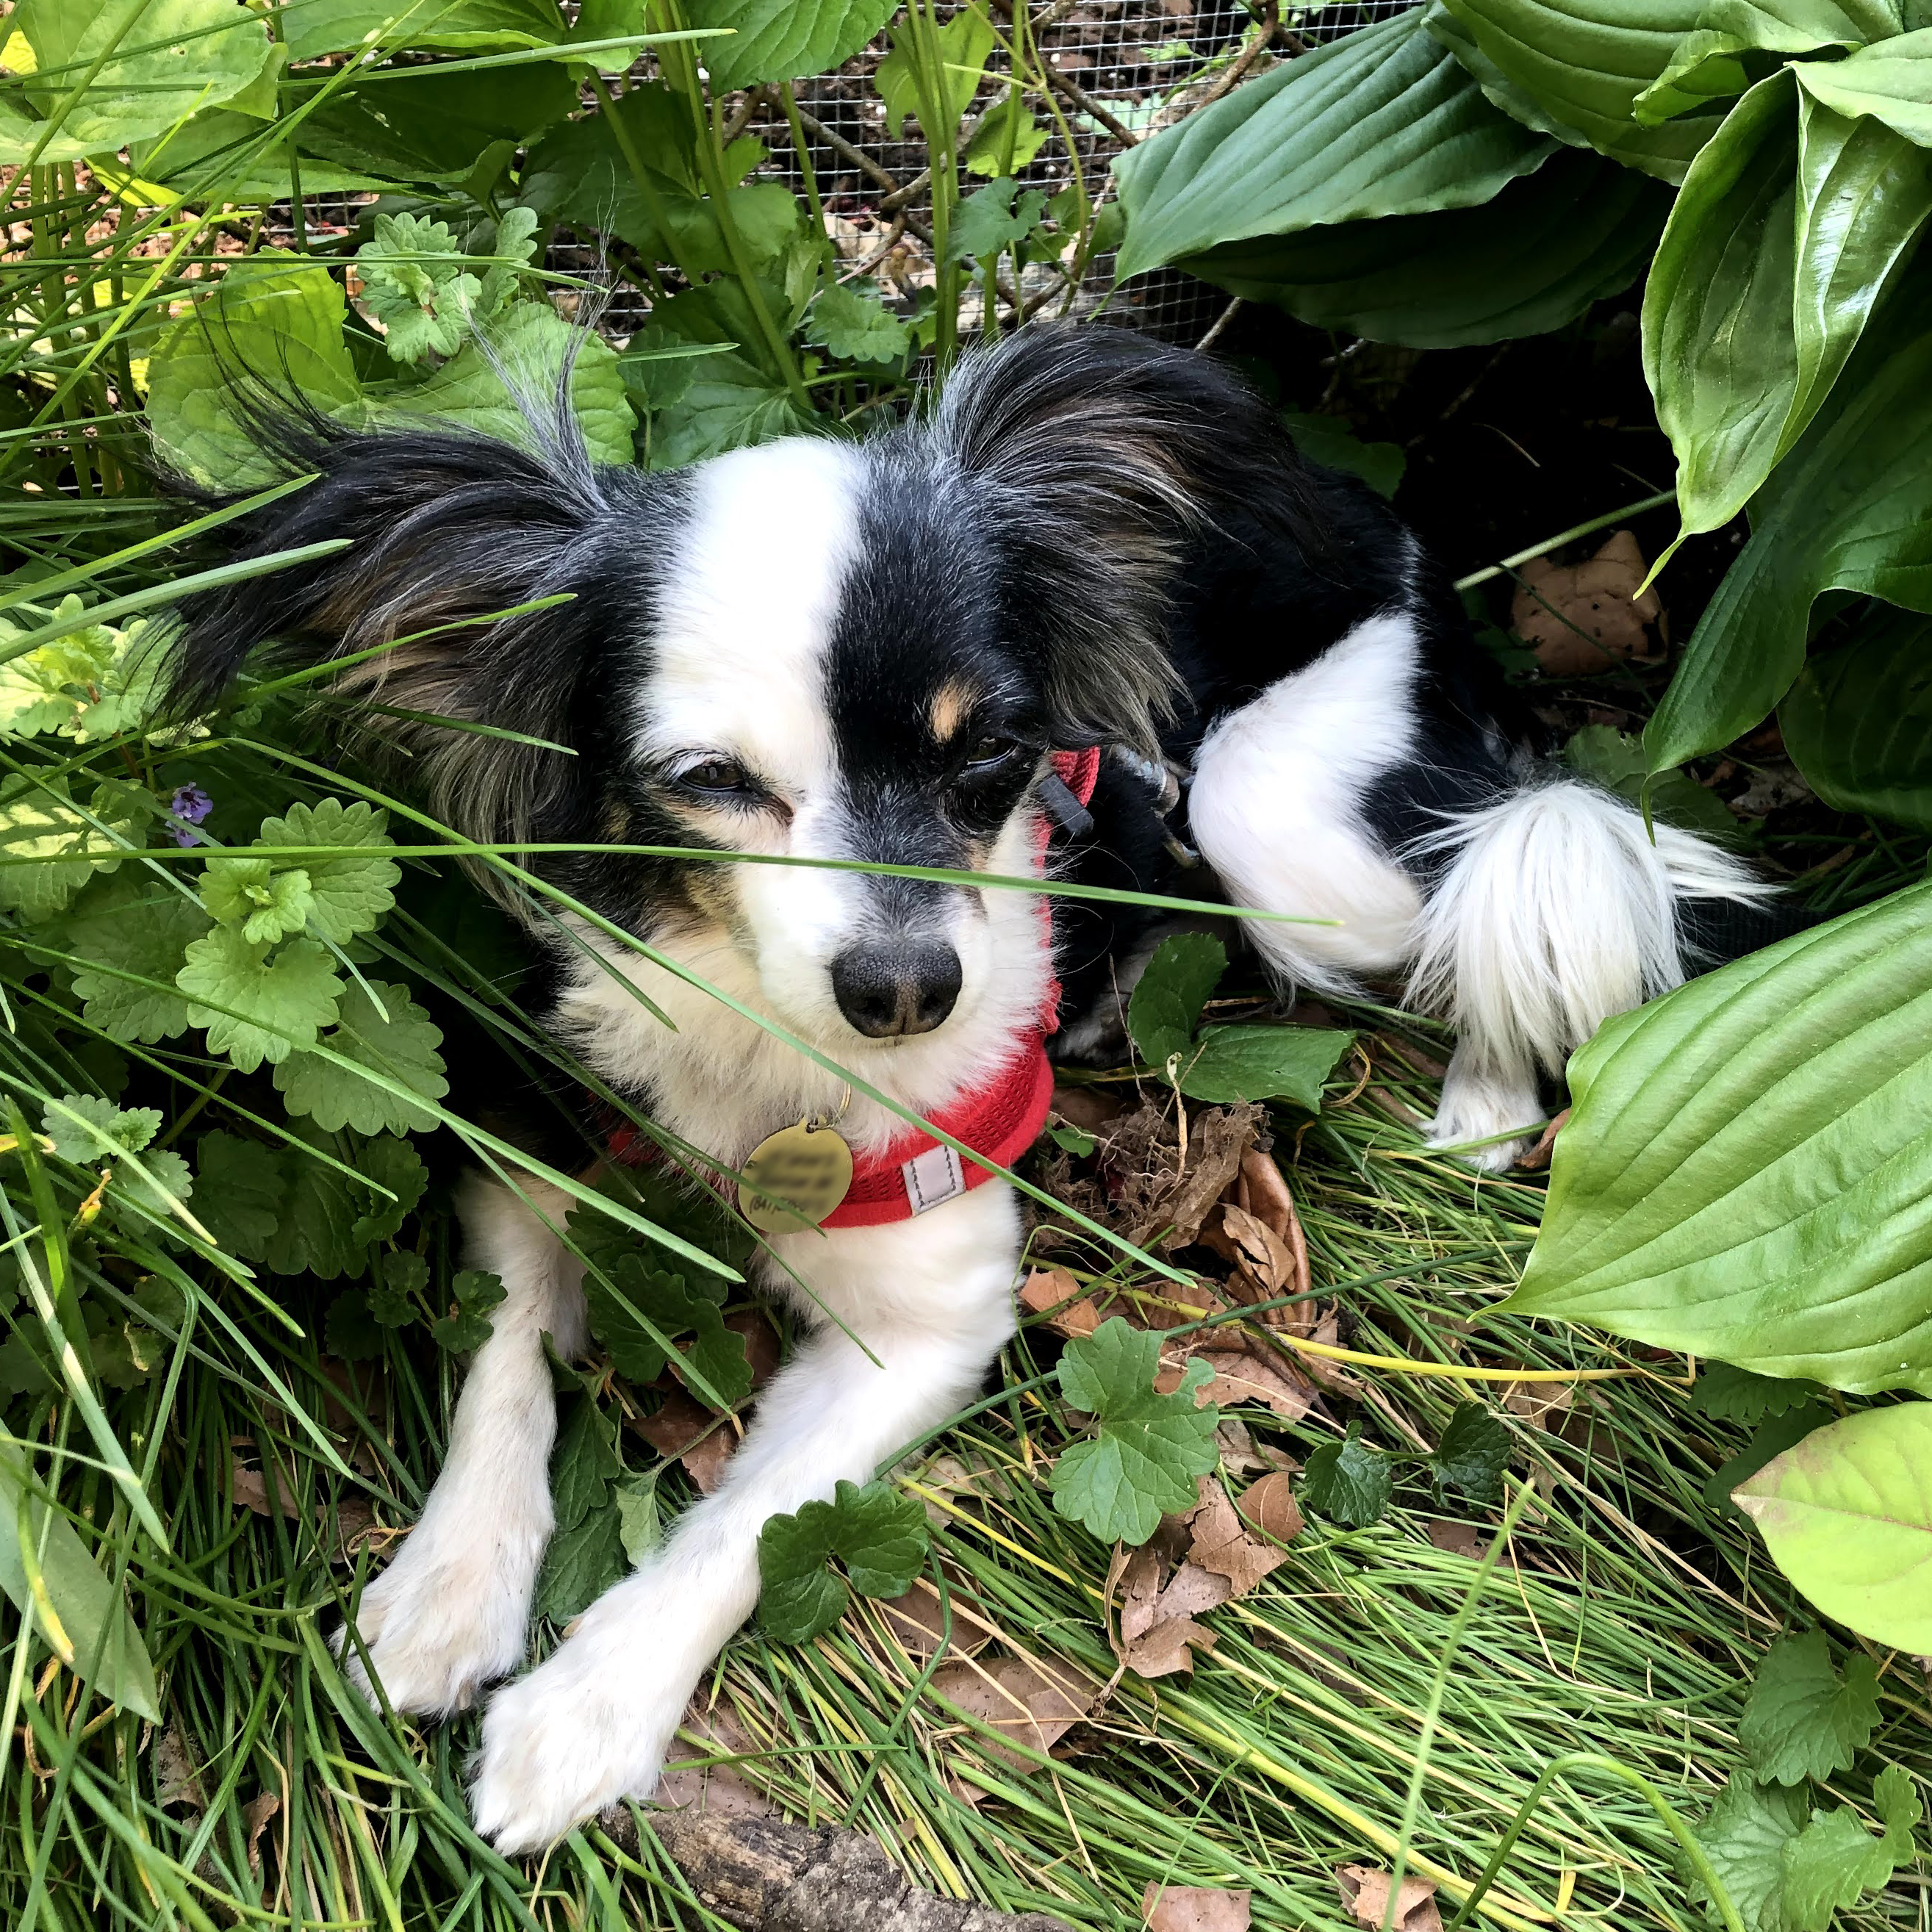 photo of a tiny dog, chihuaha and papillon mix. She has large black ears and a white stripe down the center of her face